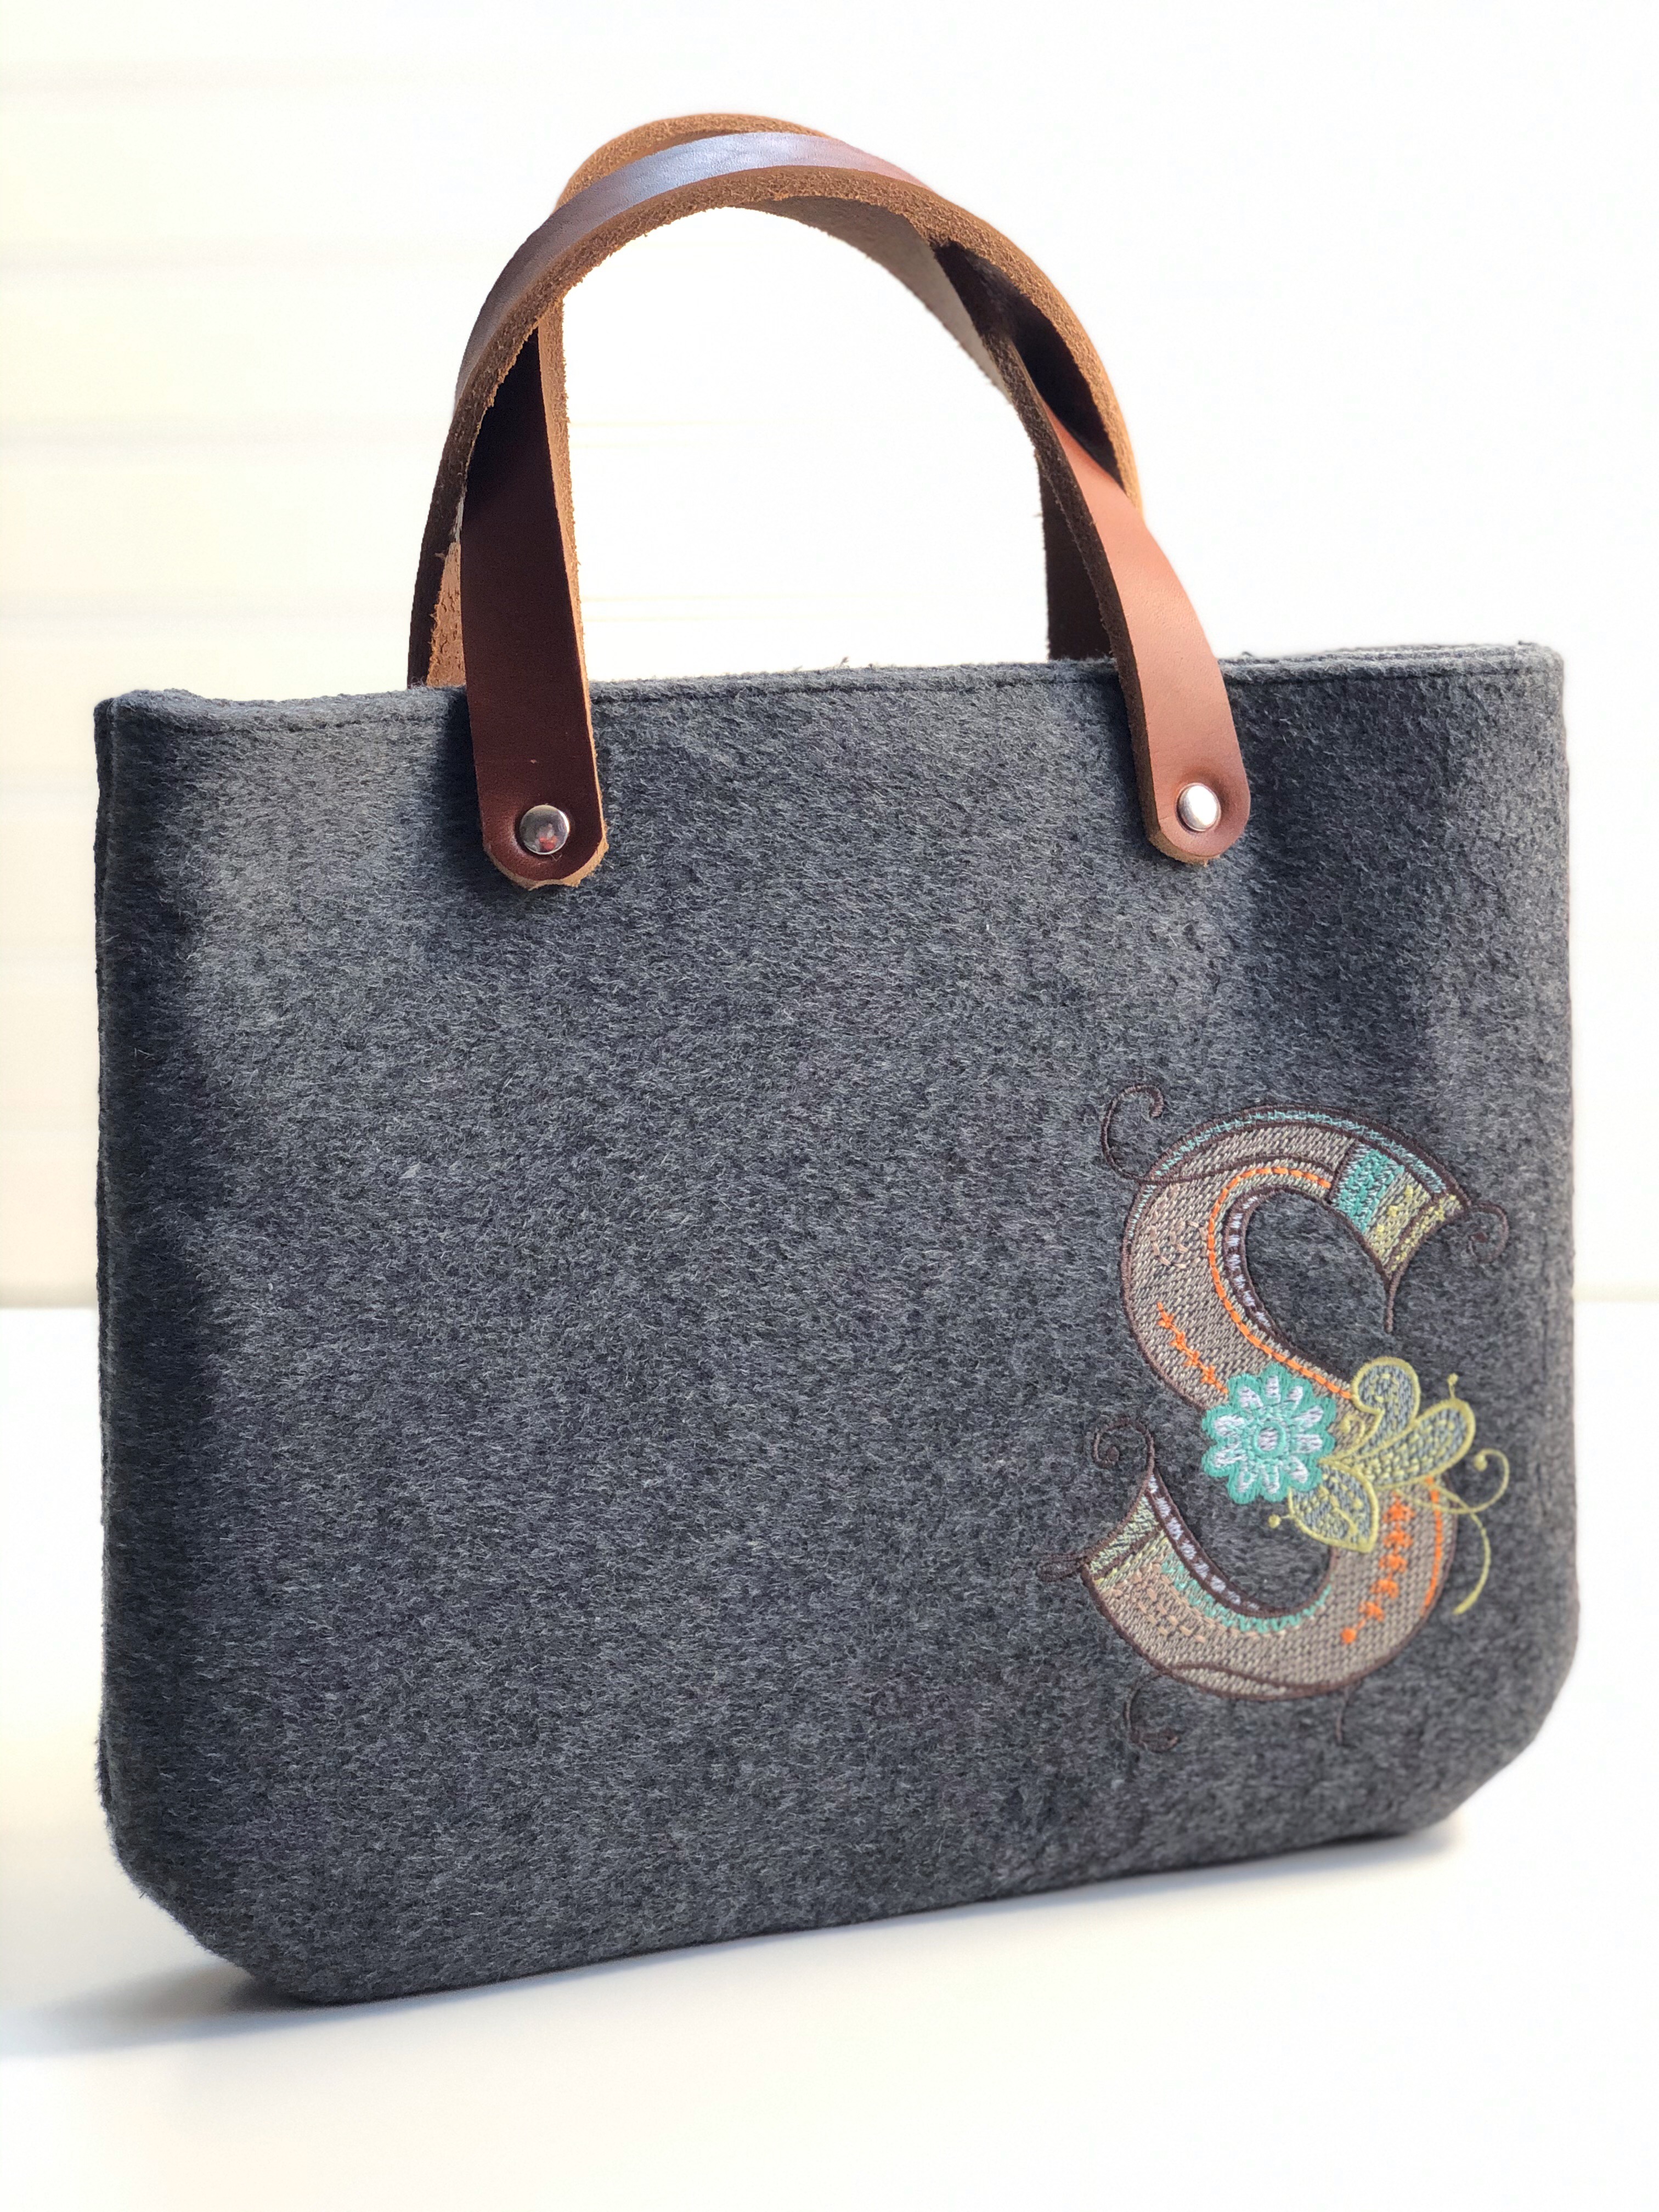 Multicolor Embroidery Bag: Finished Product